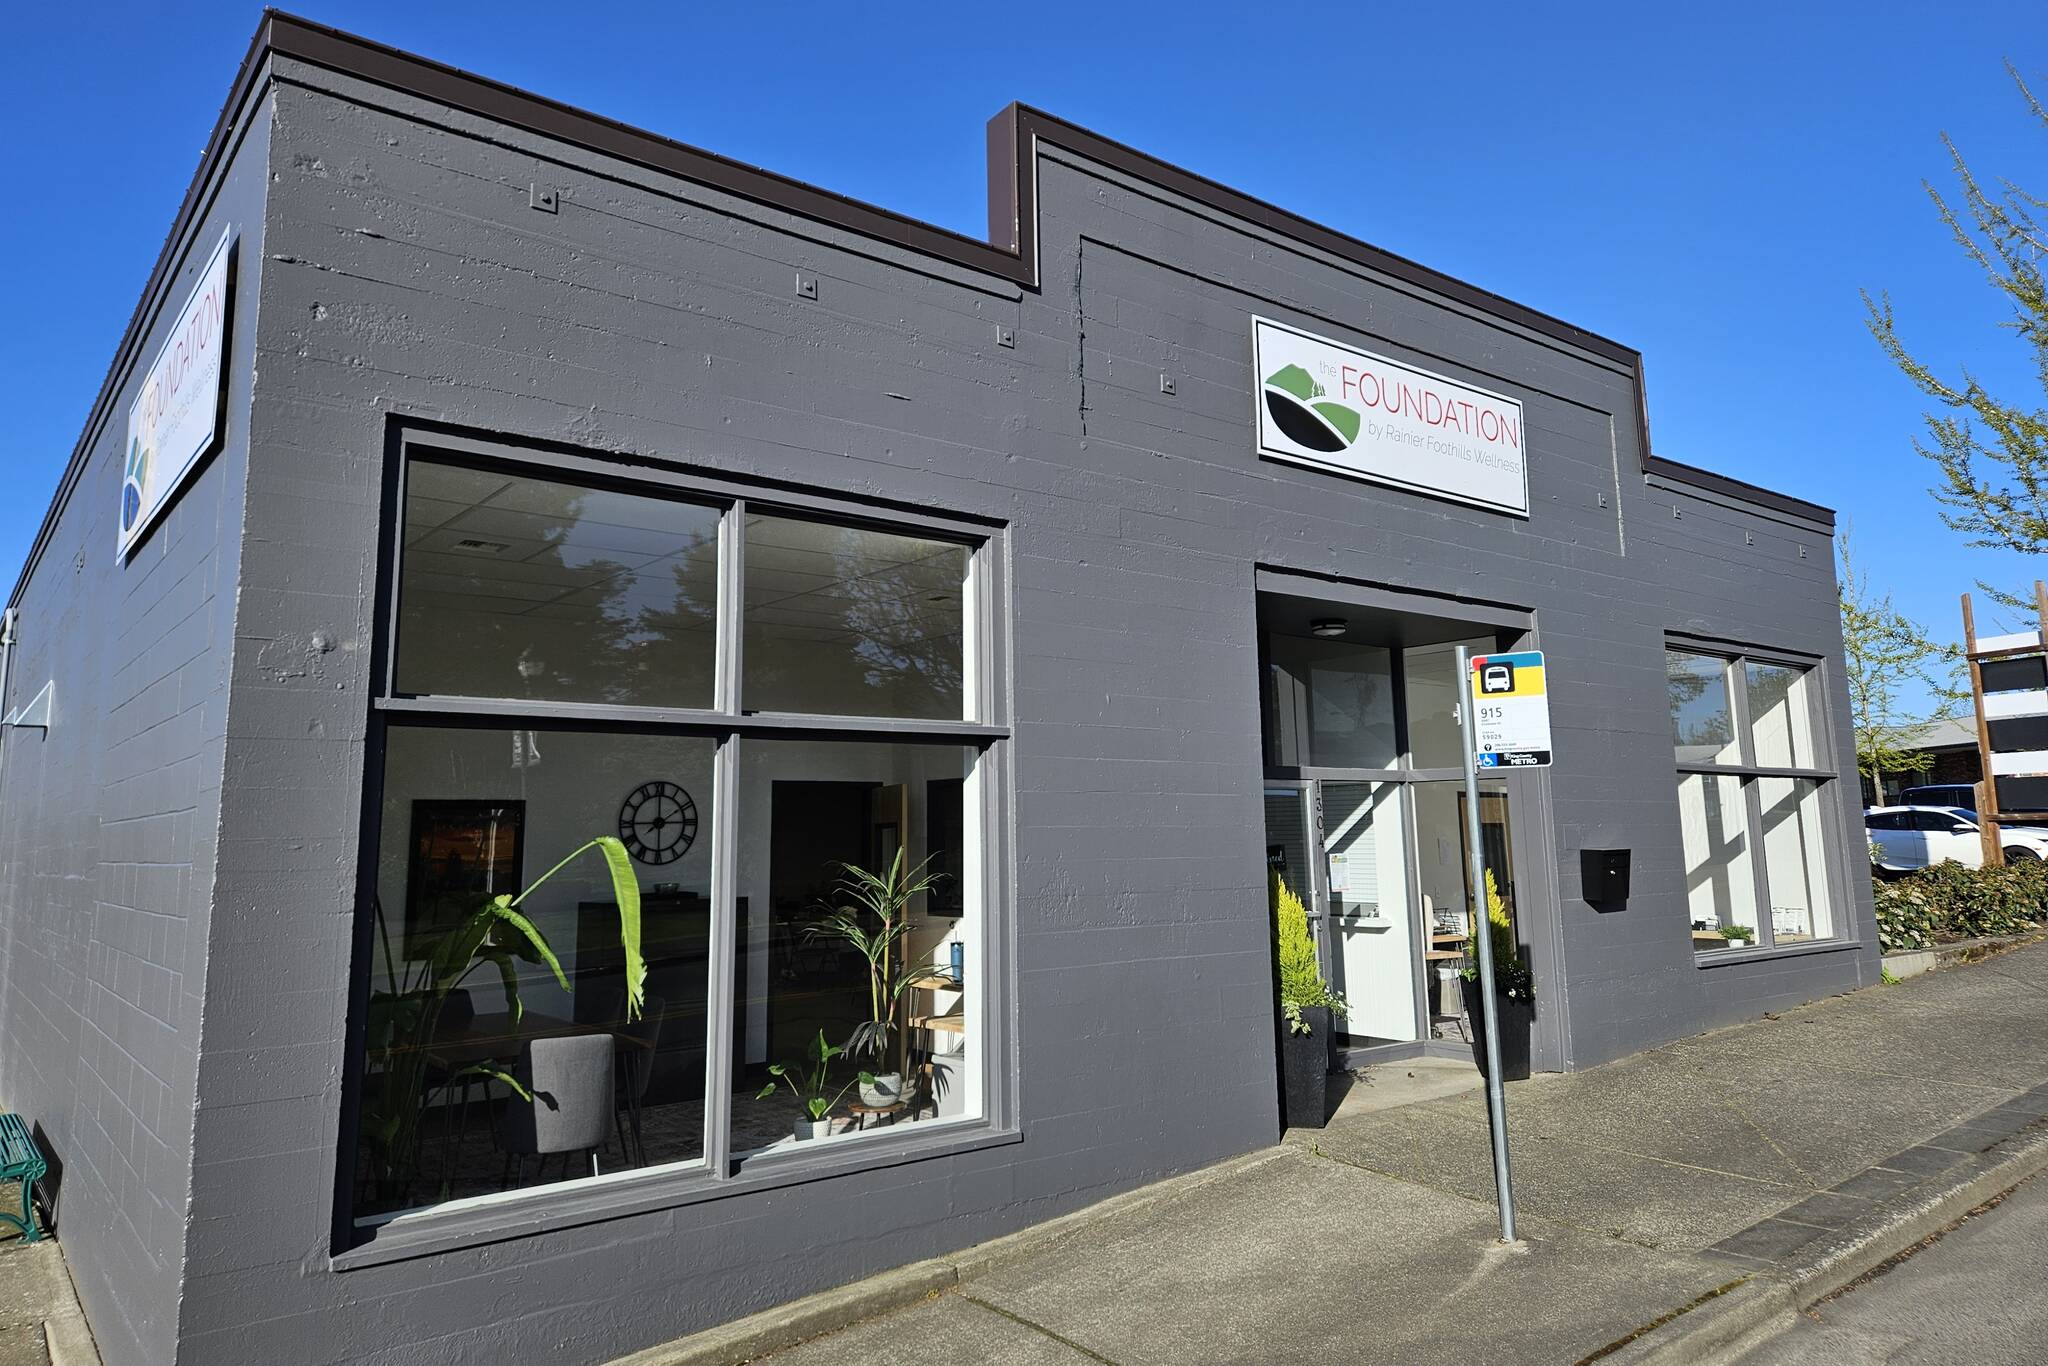 The Rainier Foothills Wellness Foundation’s new location on Griffin Avenue. Photo by Ray Miller-Still